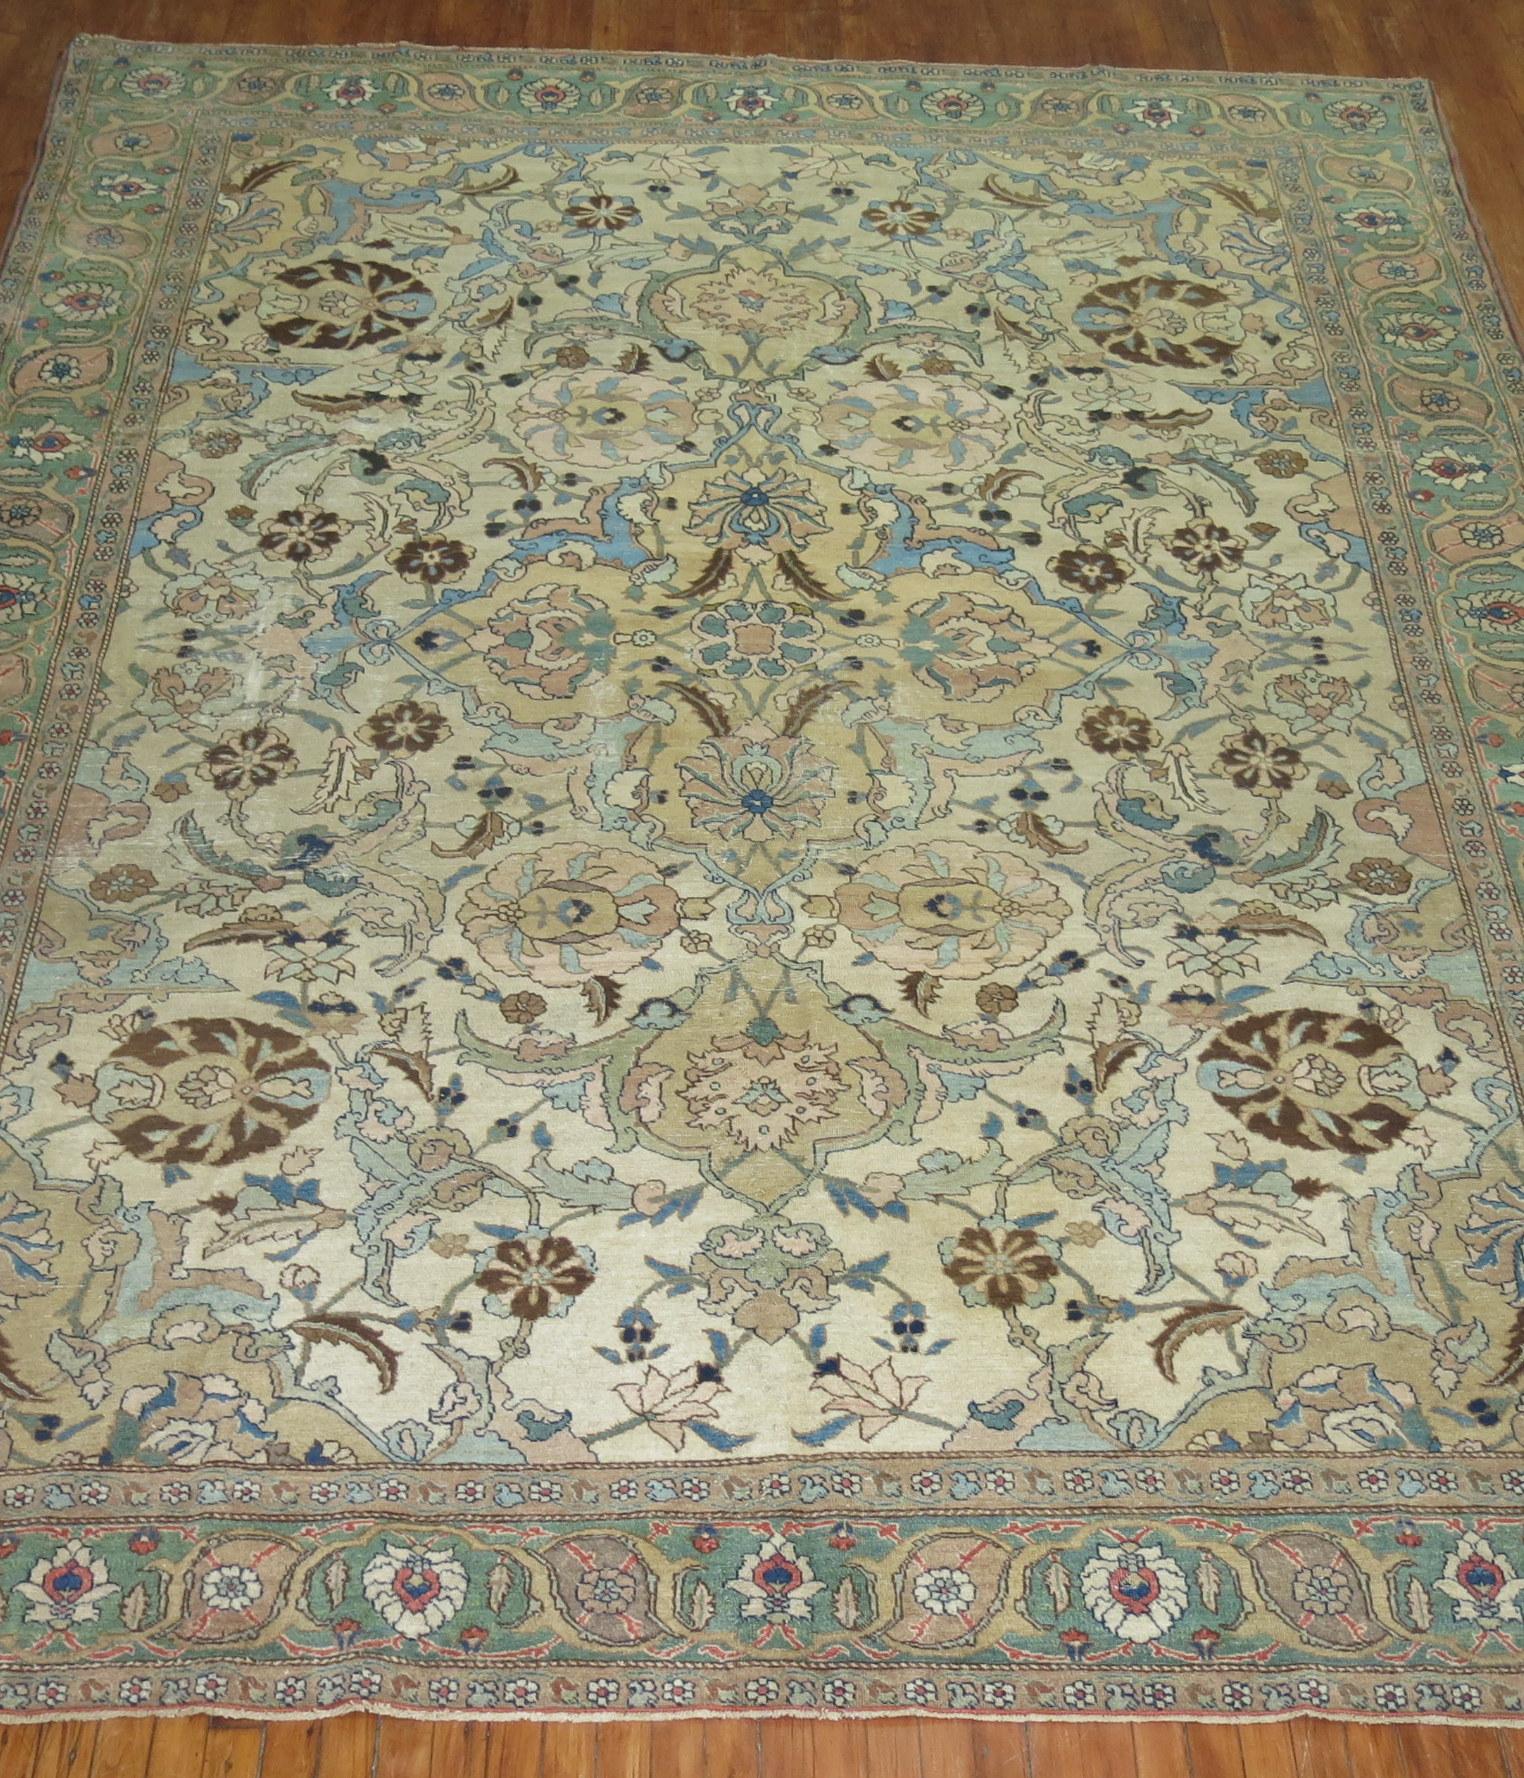 An early 20th century Persian Tabriz rug with light blue and brown dominant accents on an off white field, green border.

Measures: 9' x 12'3''.